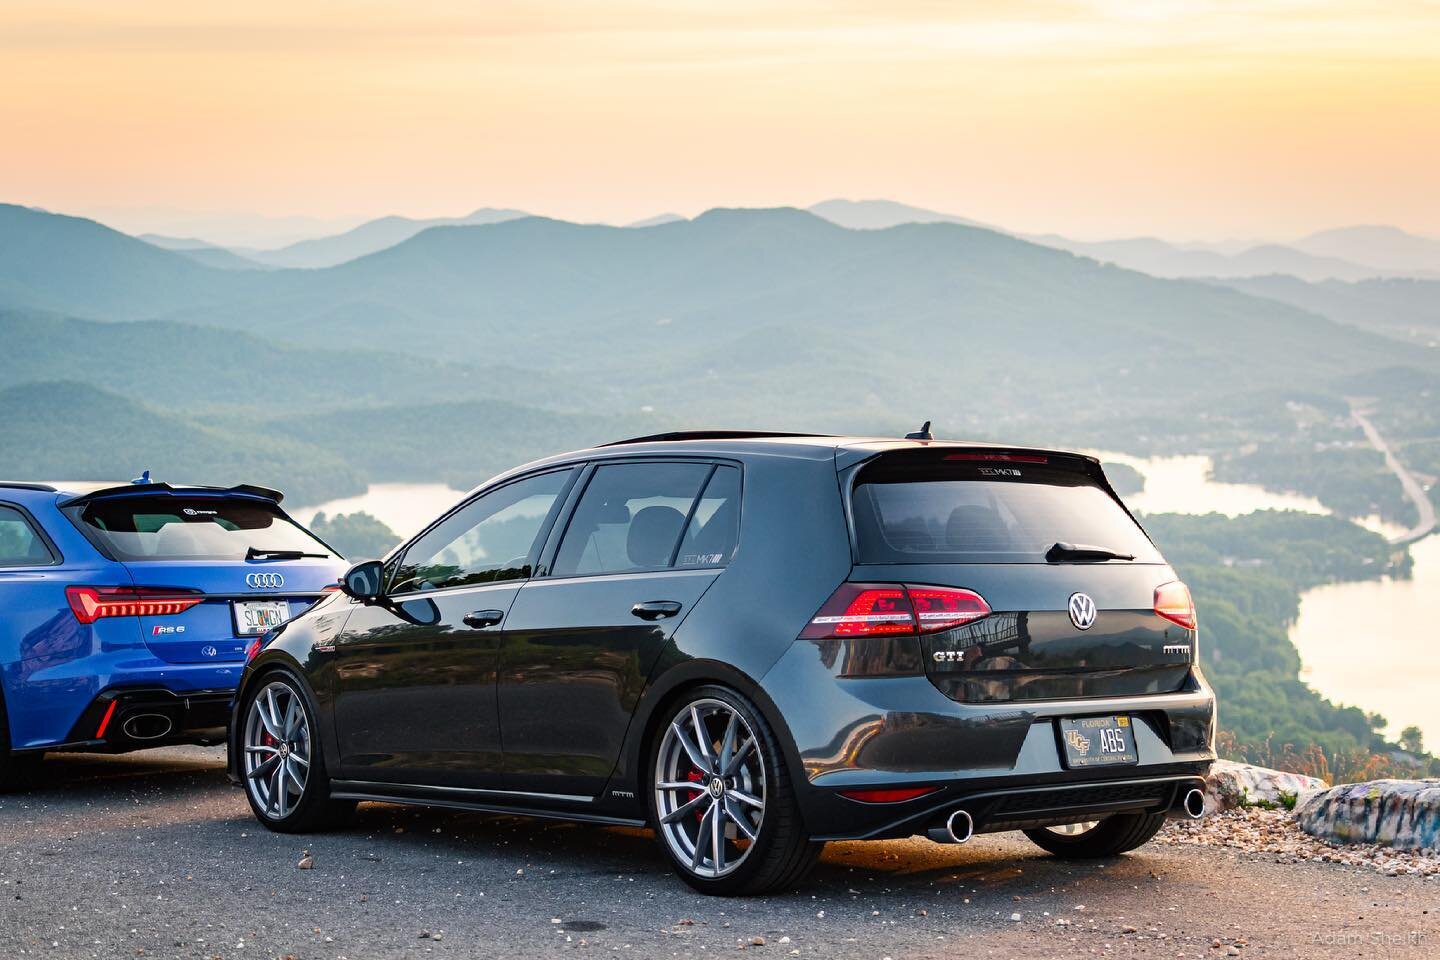 Here&rsquo;s to 7 incredible years with the GTI and all the adventures and friendships it has played a role in along the way. 

This last year wasn&rsquo;t without it&rsquo;s fair share of hiccups, but it has never been better after all is said and d